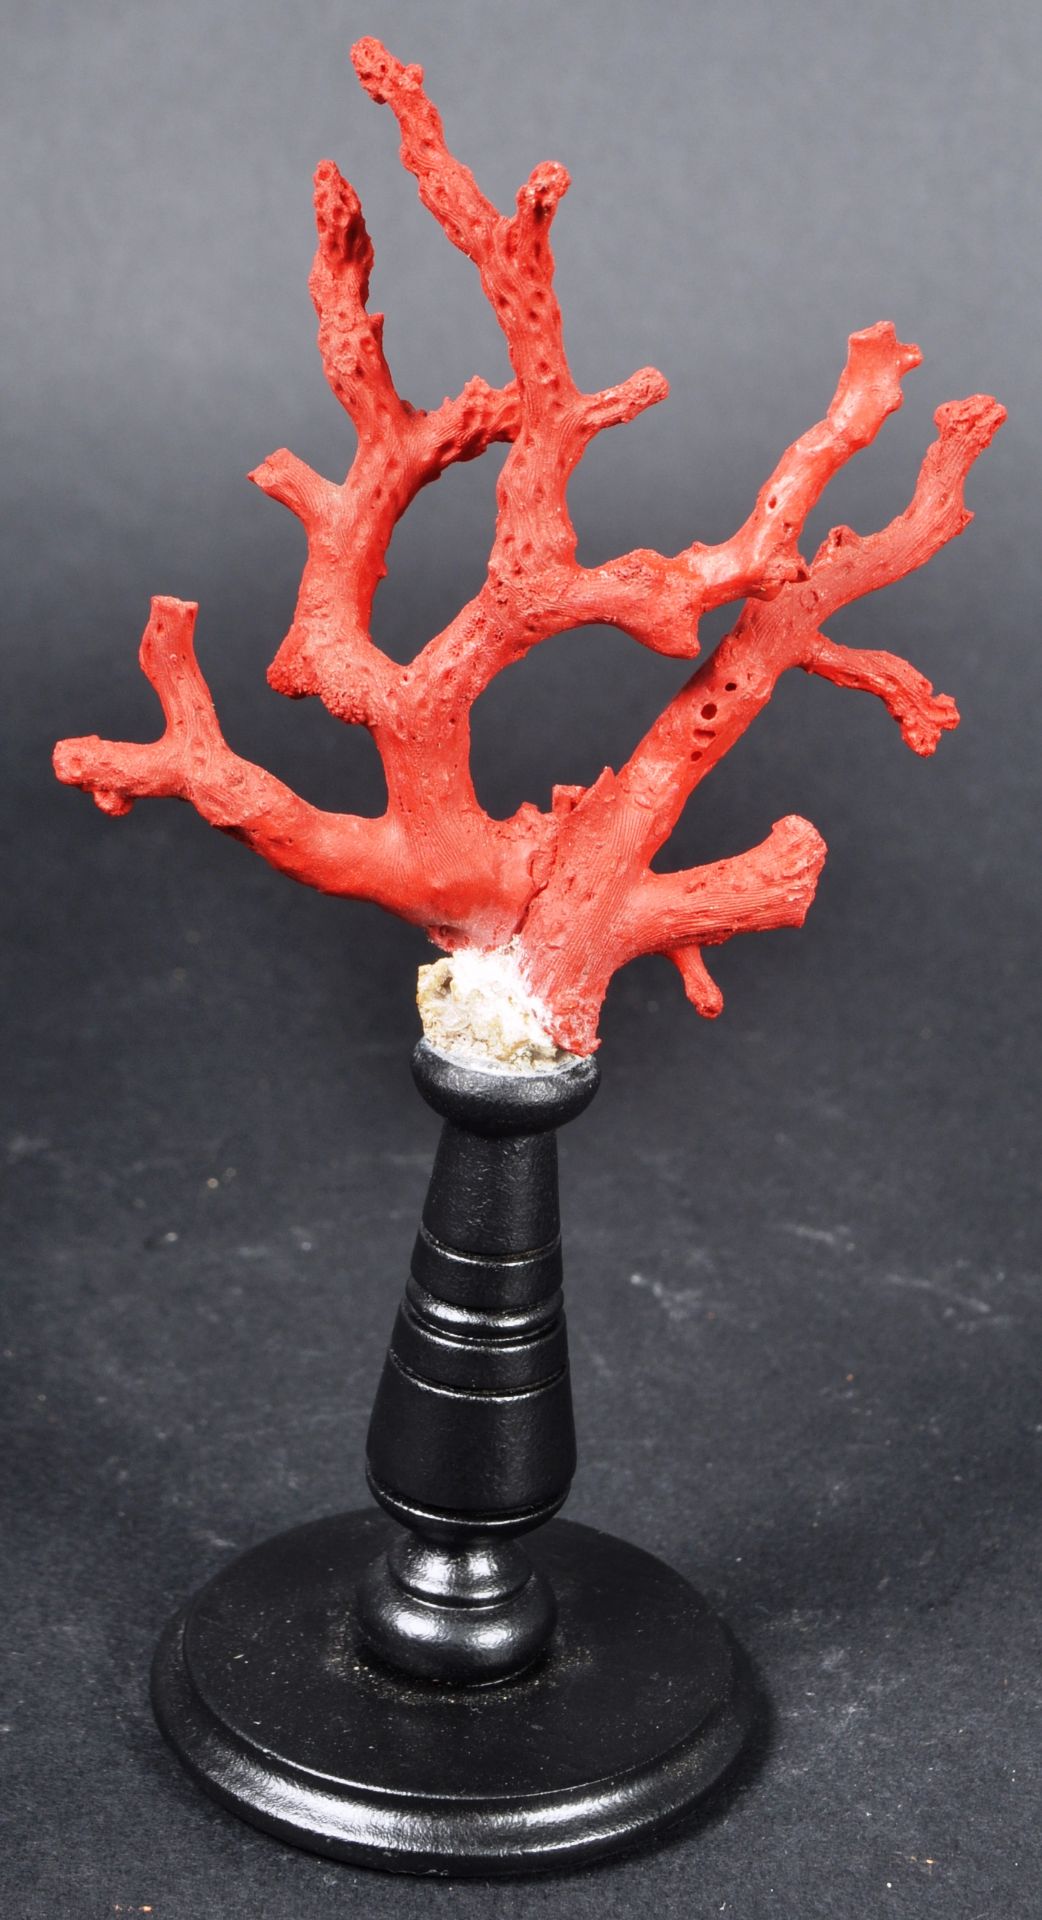 NATURAL HISTORY & TAXIDERMY - SICILIAN RED CORAL BRANCH